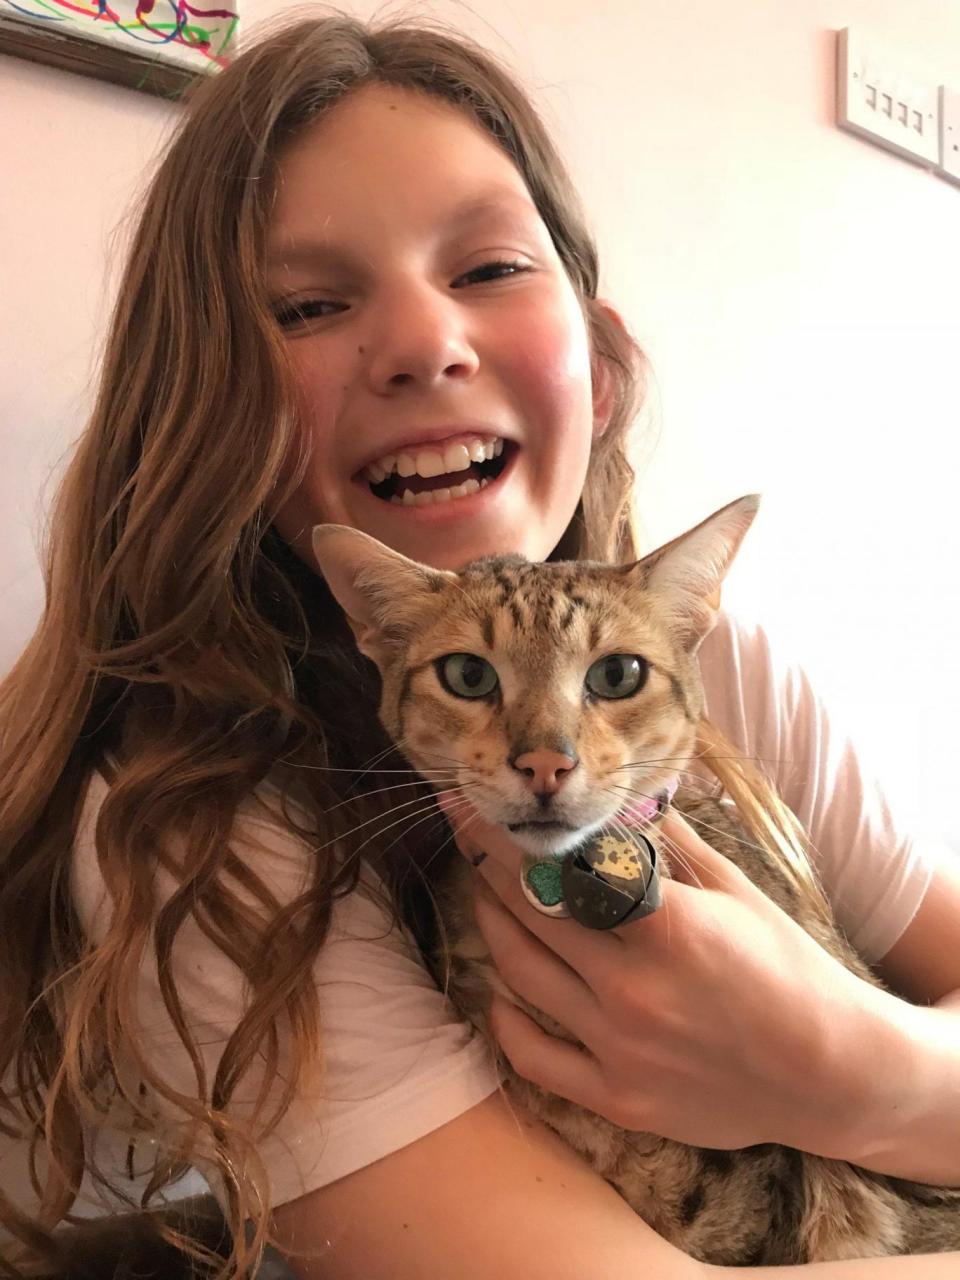 Tabitha Brown pictured with her cat that was found mutilated